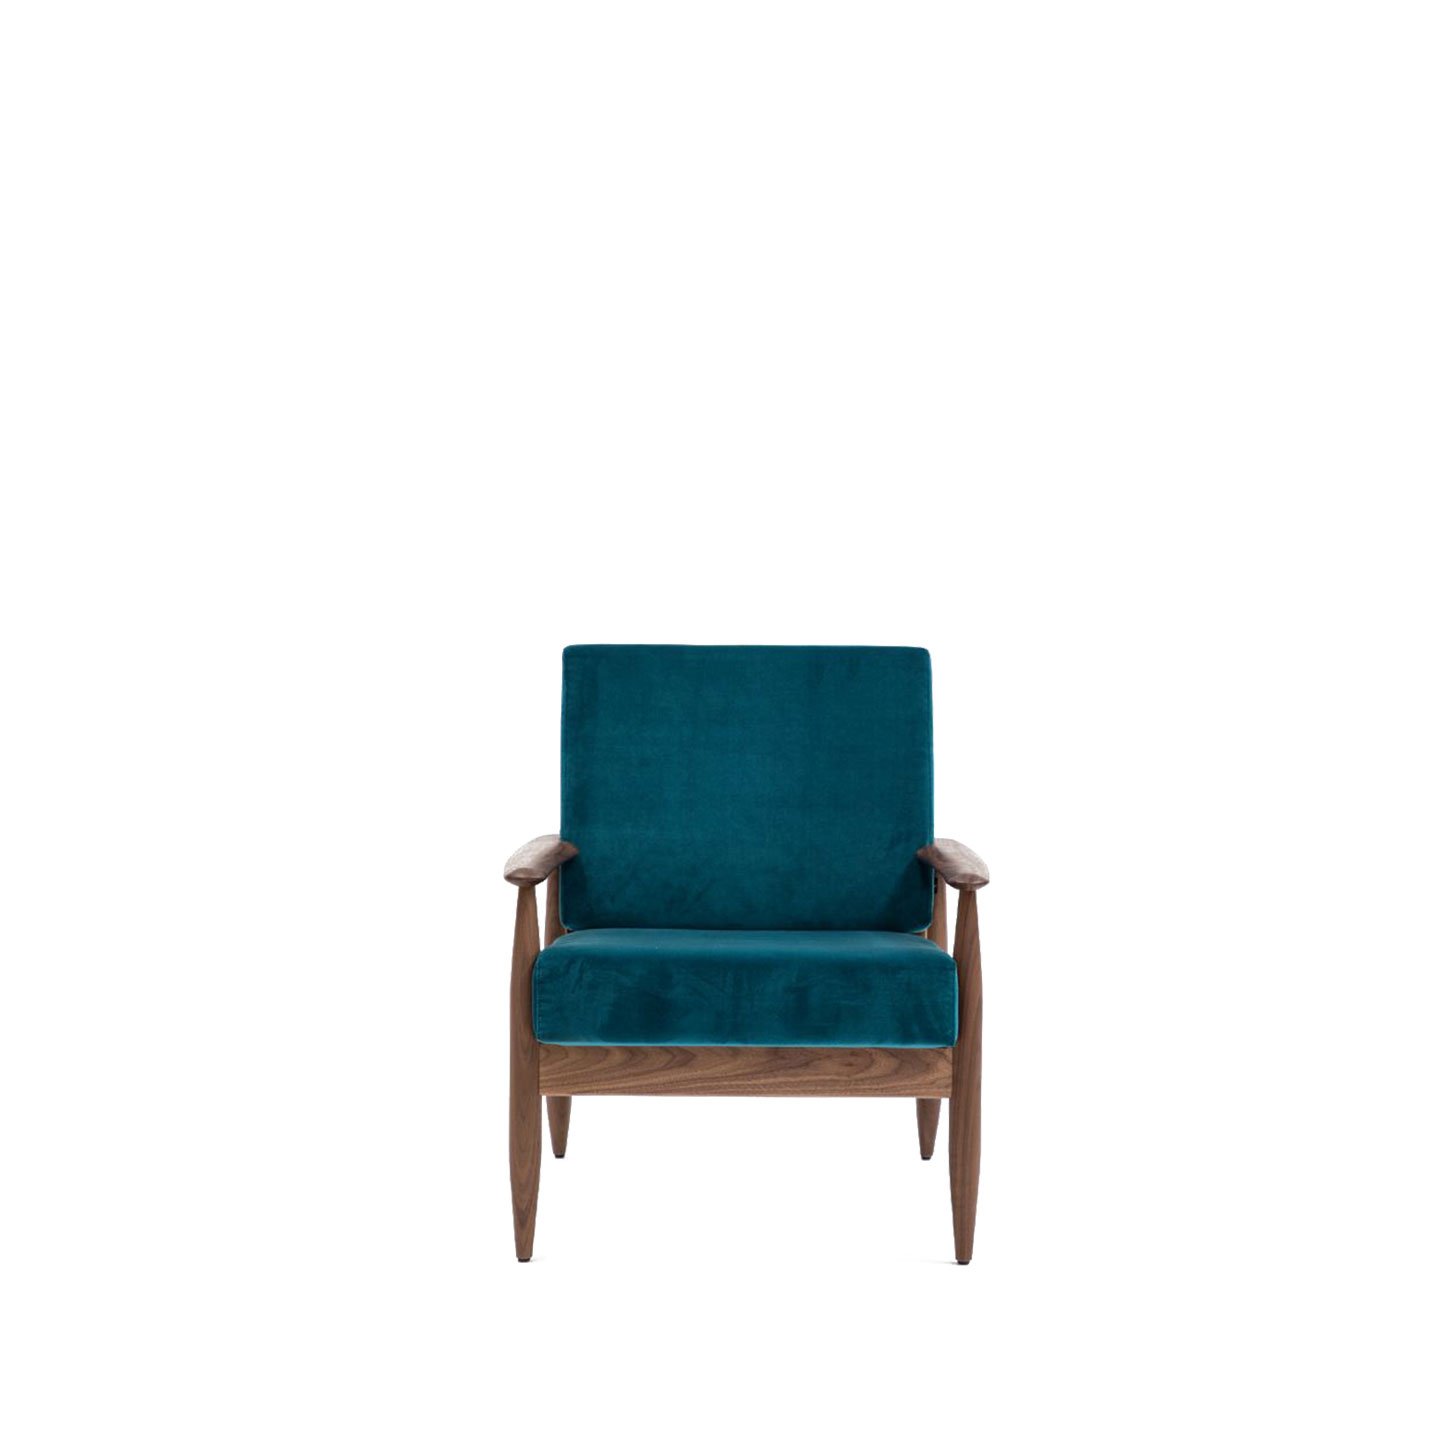 Haworth Buzzi Nordic ST100 lounge chair in teal blue suede